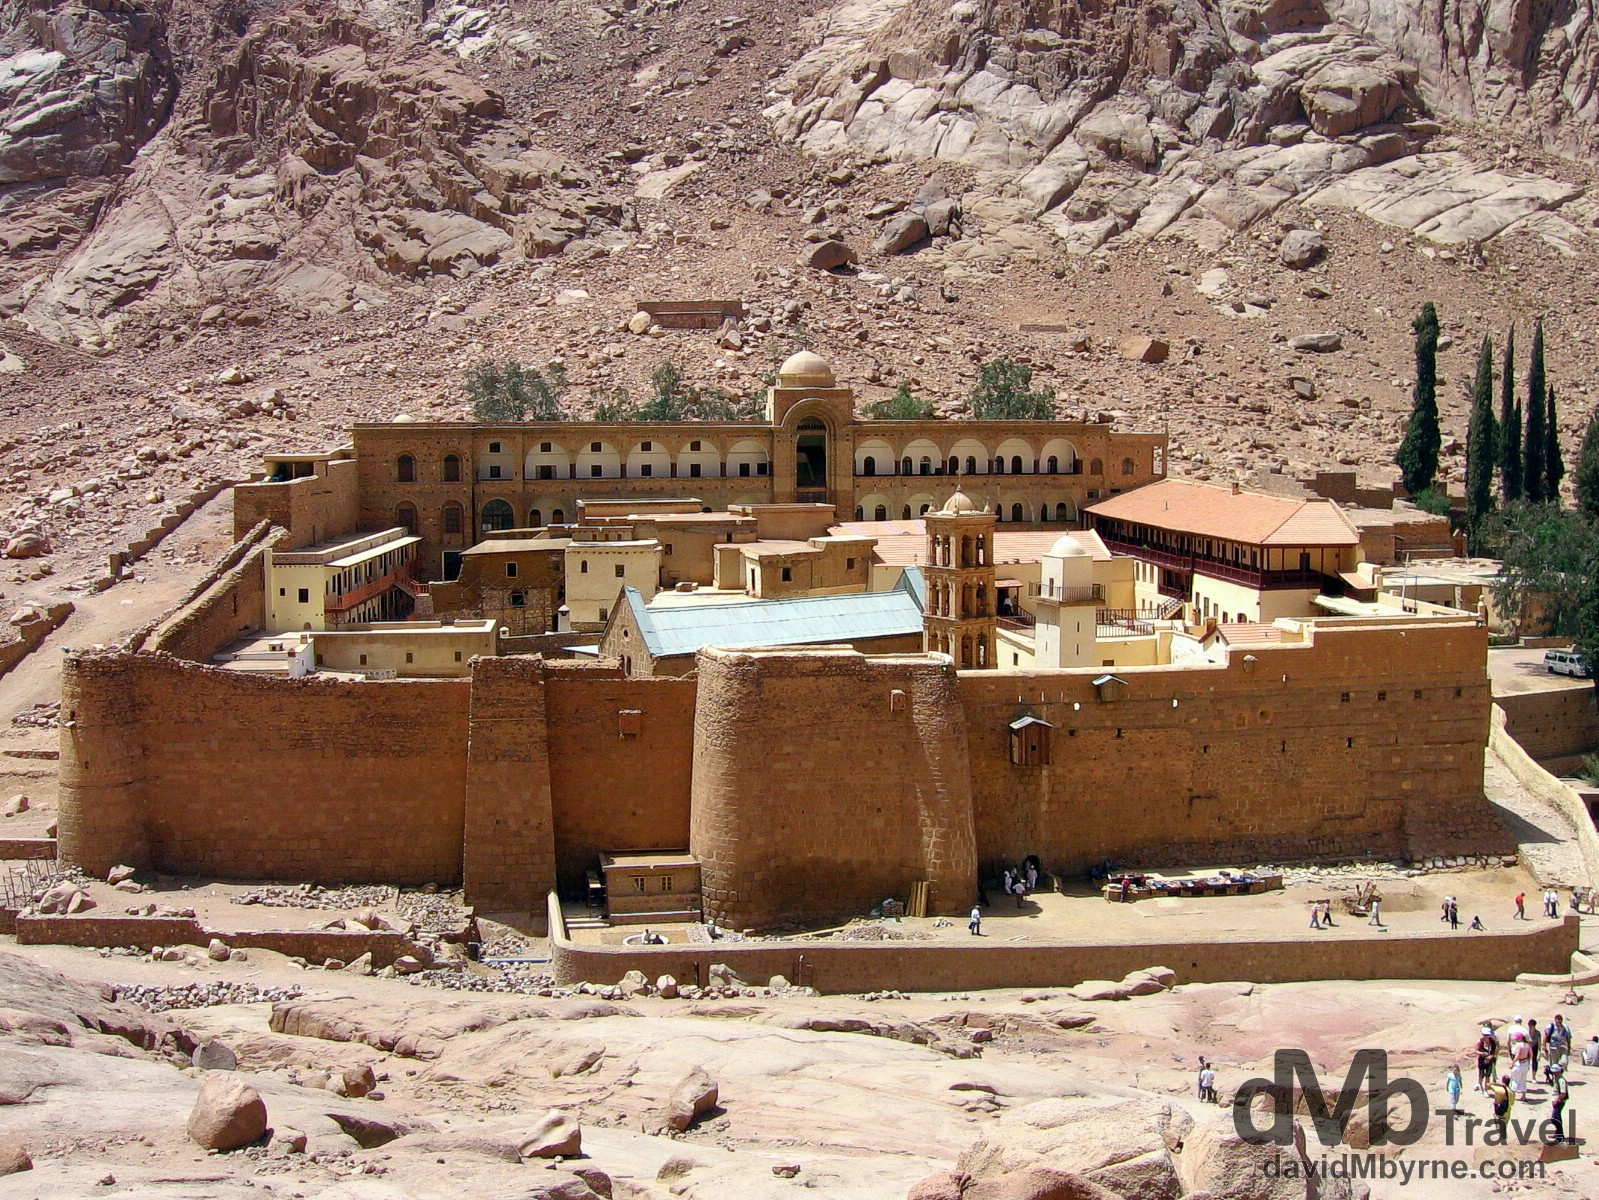 St. Katherine's monastery, and the adjacent Mt. Sinai, are located in the interior of the Sinai Peninsula in Egypt. This is one of the oldest continuously functioning Christian monasteries in the world; the Byzantine empress Helena had a small chapel built on the site where it was believed God spoke to Moses via the burning bush. The monastery, a UNESCO World Heritage Site, is dedicated to St Katherine, the legendary martyr from Alexandria who was tortured on a spiked wheel and then beheaded, and is home to 22 Greek Orthodox monks. The monastery library preserves the second largest collection of early codices and manuscripts in the world, outnumbered only by the Vatican Library, and it also houses some irreplaceable works of art. St. Katherine's Monastery, Sinai Peninsula, Egypt. April 22nd 2008.